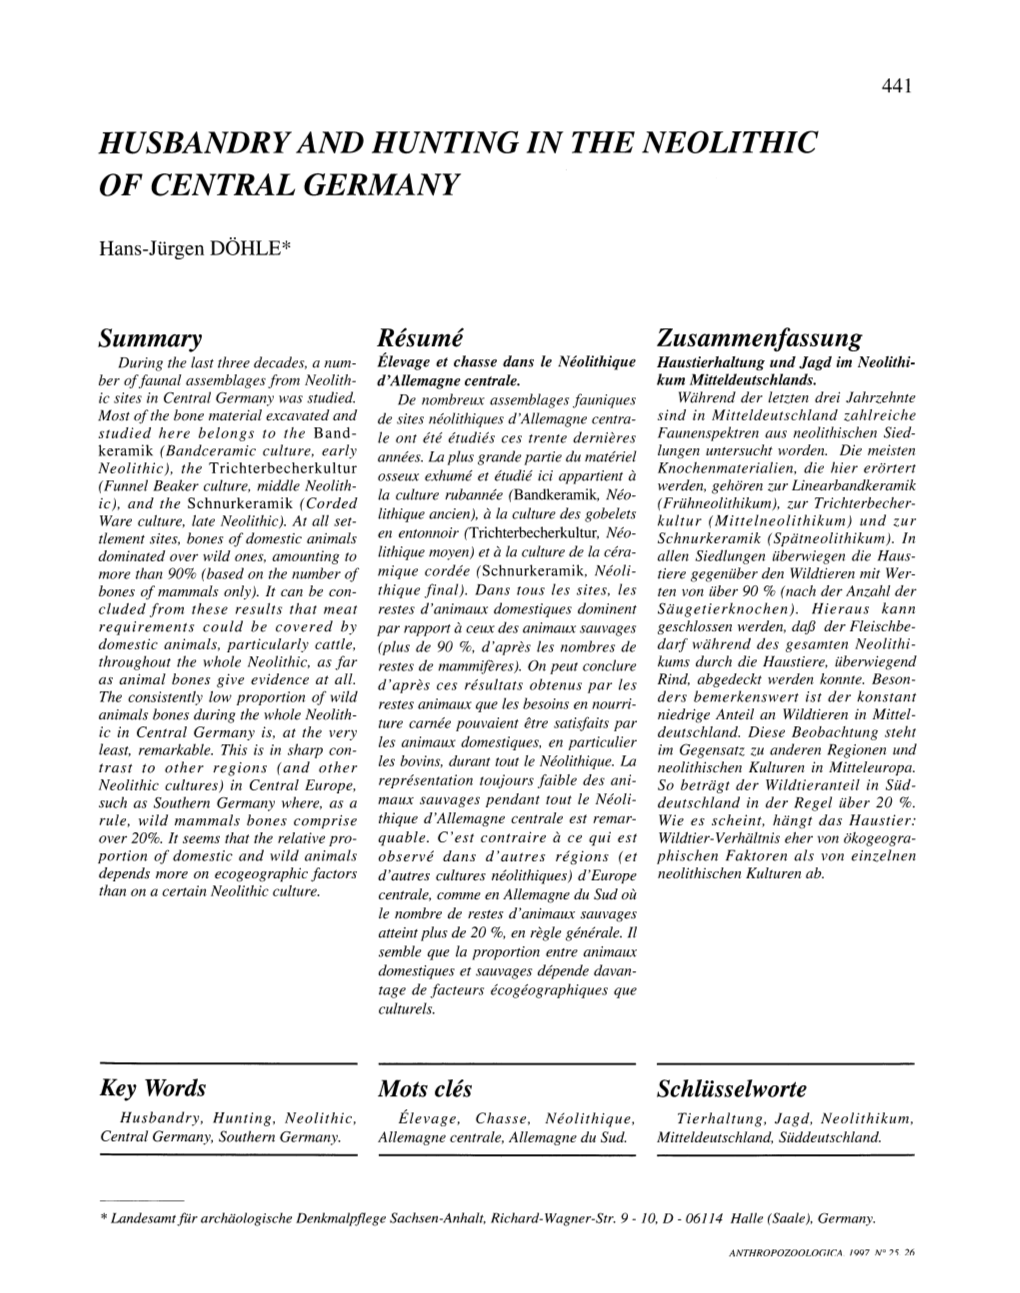 Husbandry and Hunting in the Neolithic of Central Germany